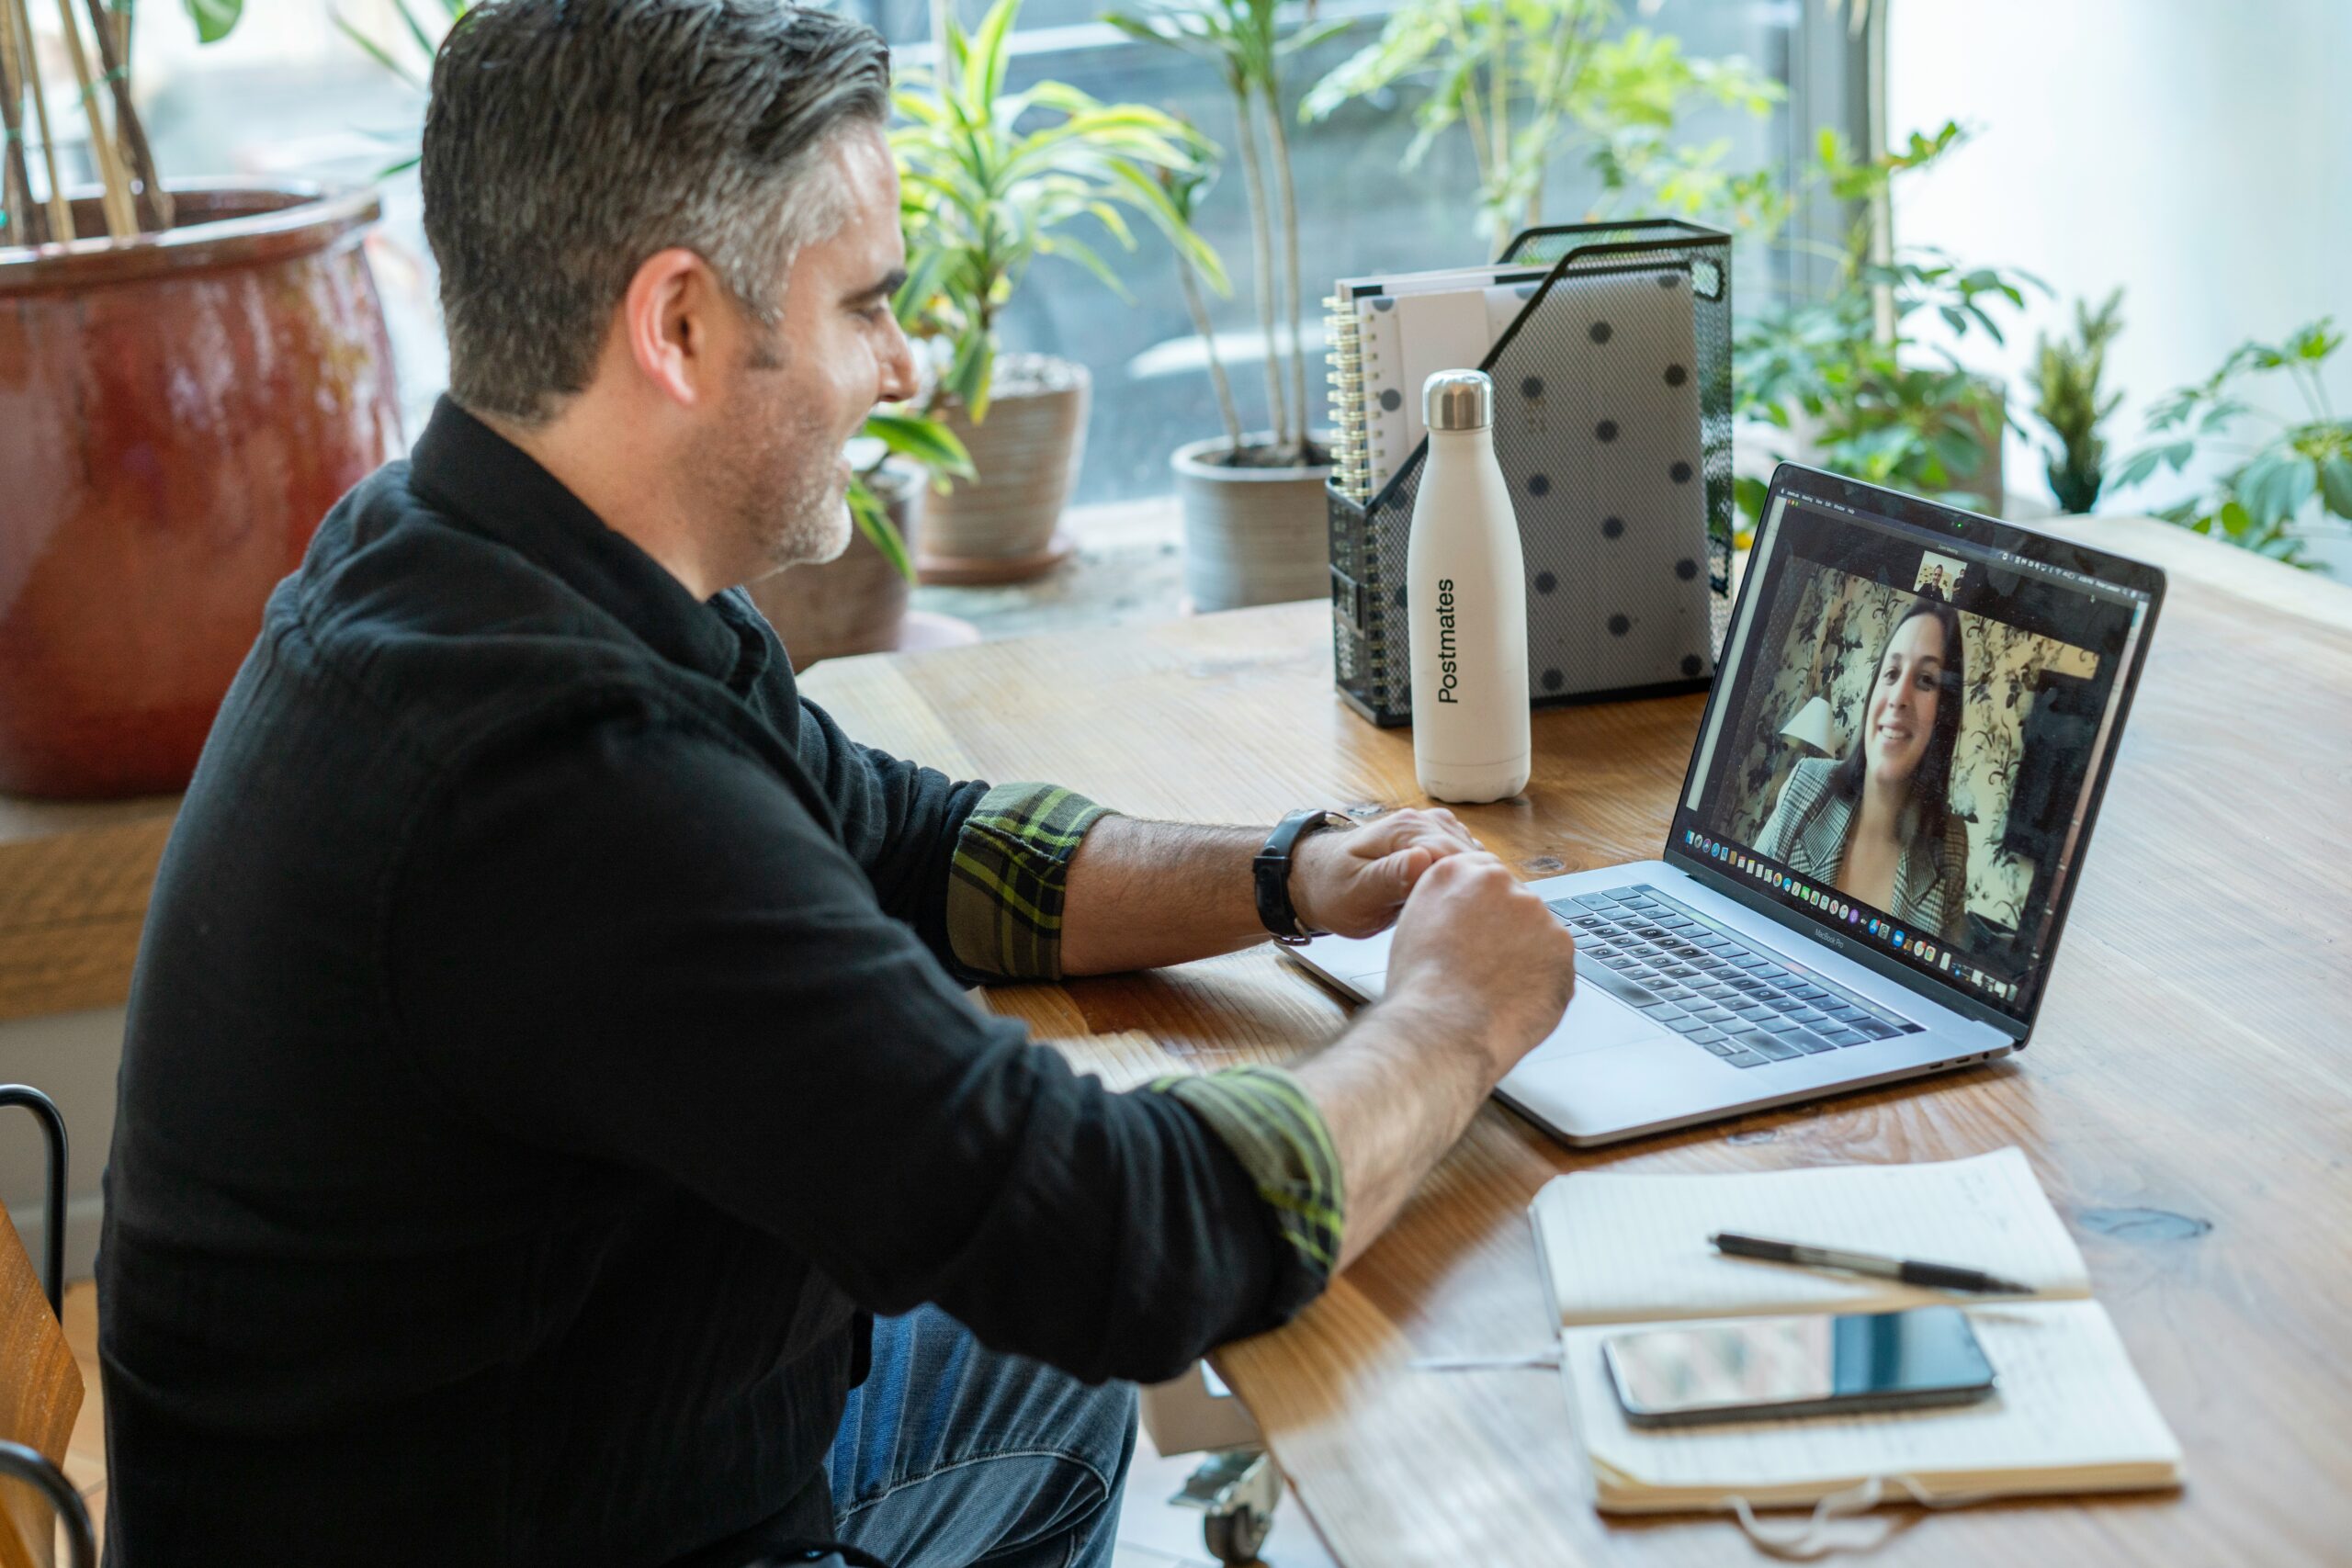 A tech consultant in a casual shirt sits at a wooden table, having a video call on his laptop with a client, surrounded by plants and notebooks.